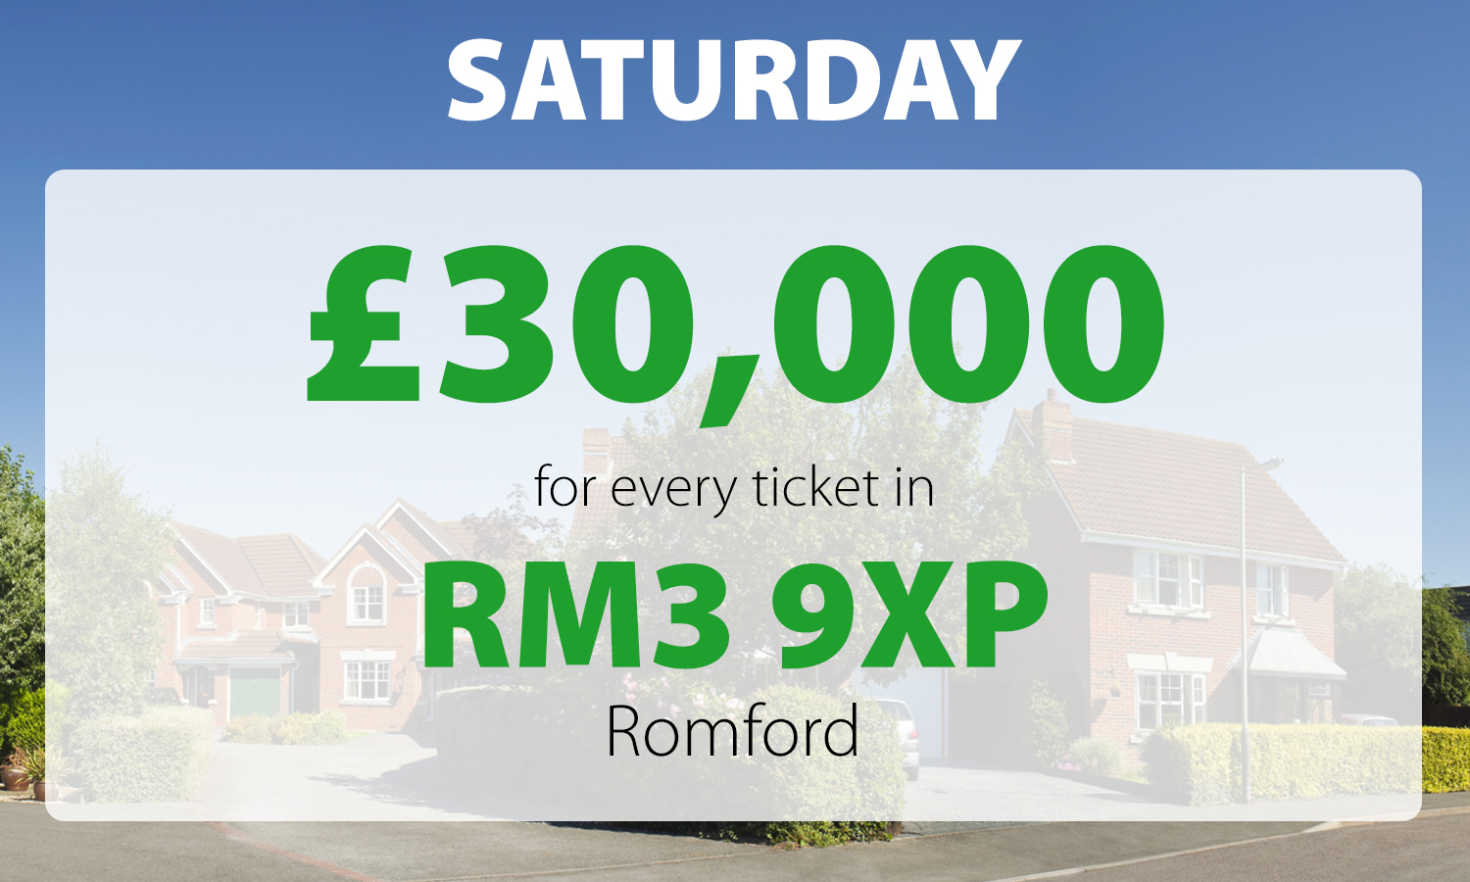 Three happy Romford players had big wins in this weekend's Saturday Street Prize